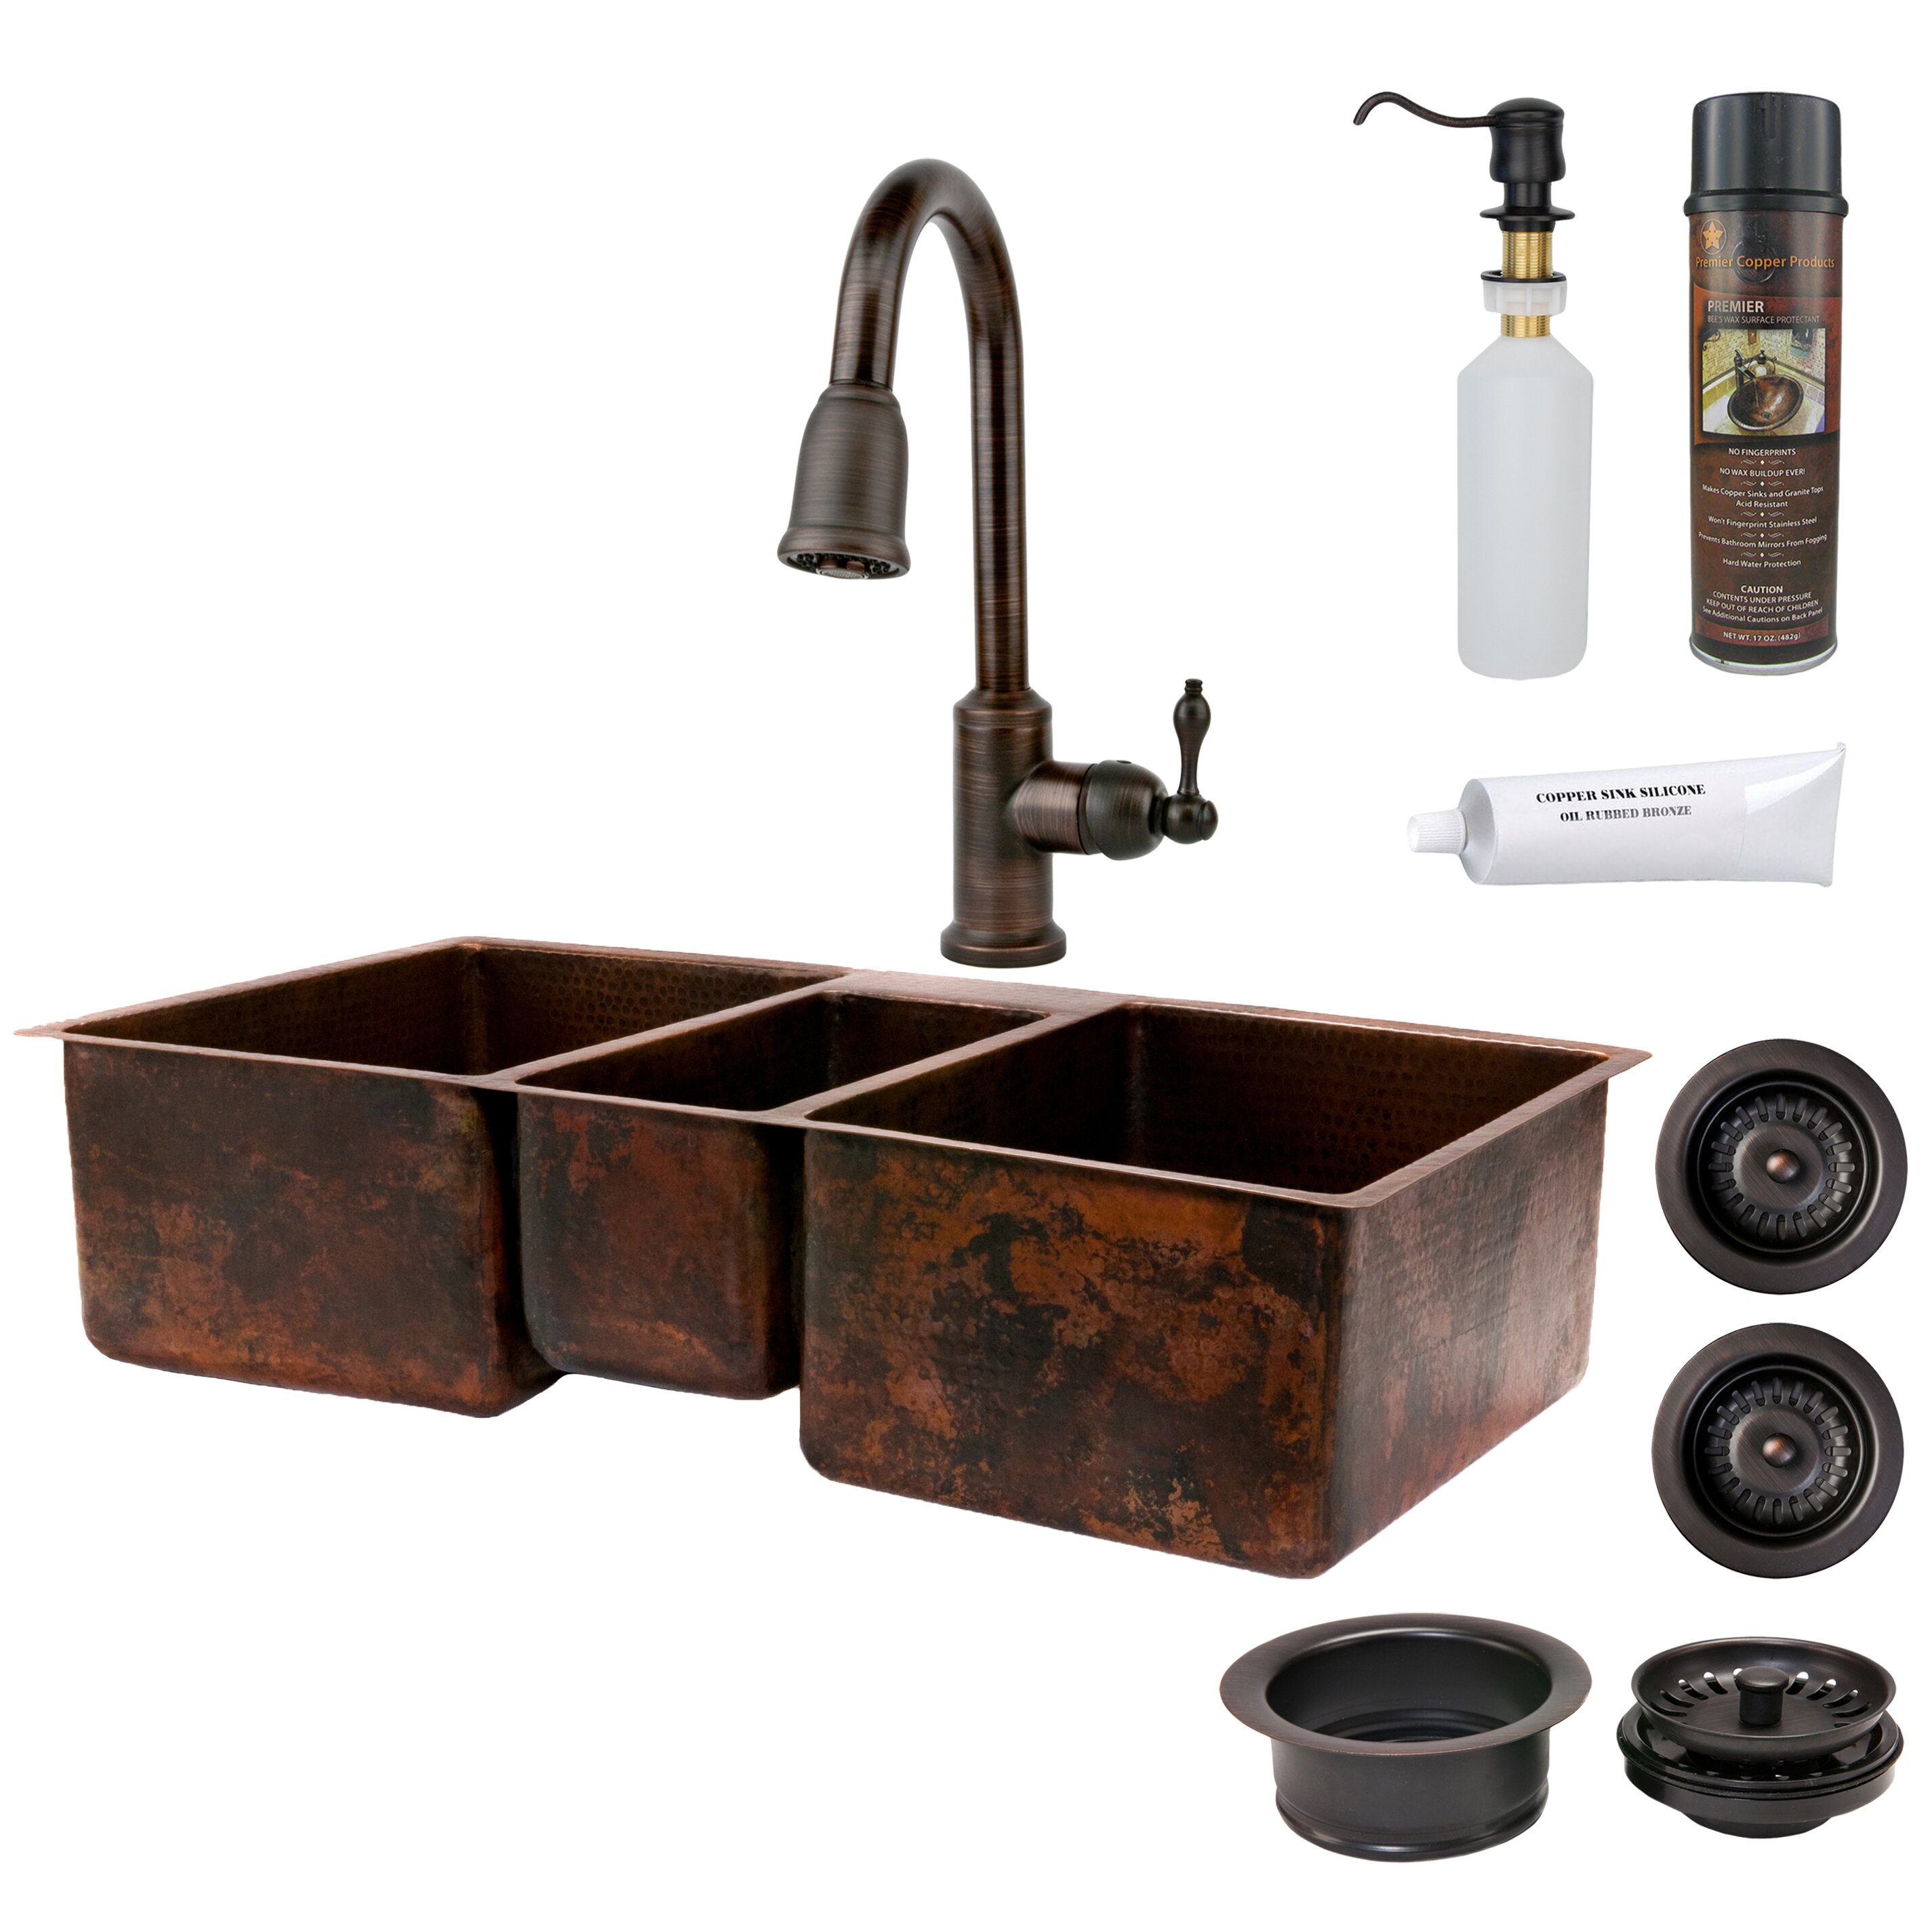 Premier Copper Products Hammered Triple Basin Kitchen Sink With ORB Pull Down Faucet Drain And Accessories KSP2 KTDB422210 